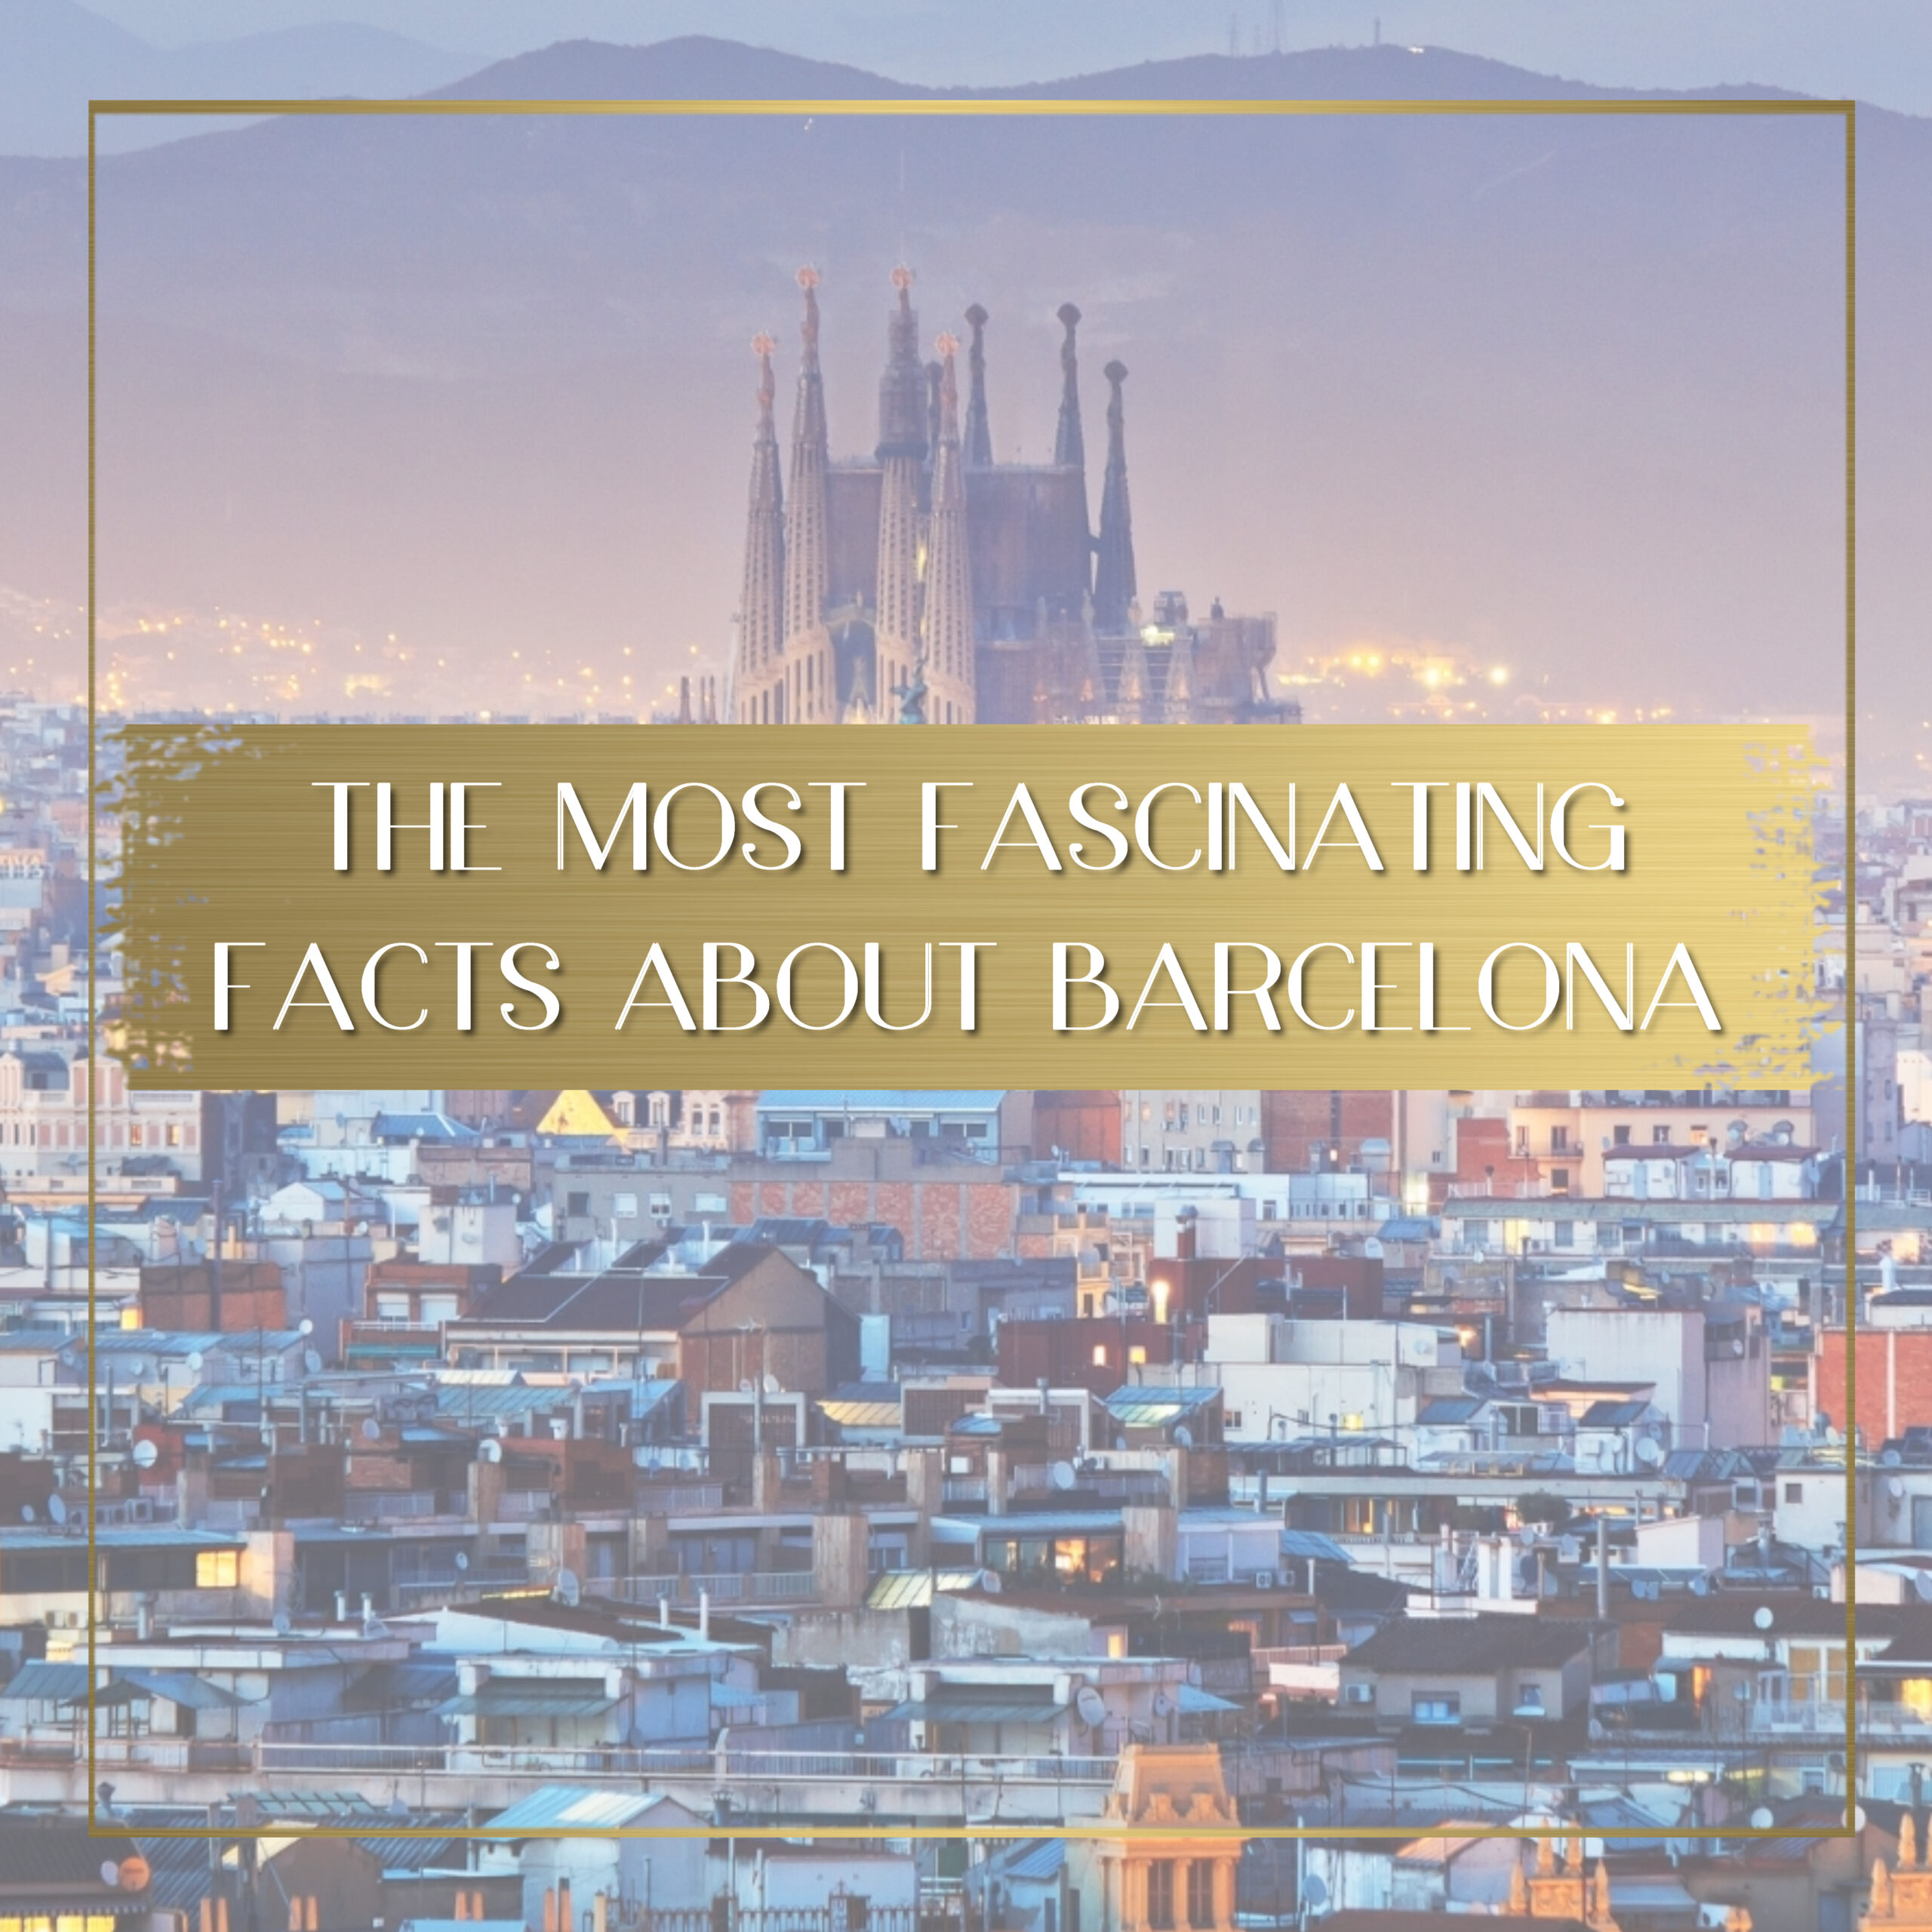 Facts about Barcelona feature